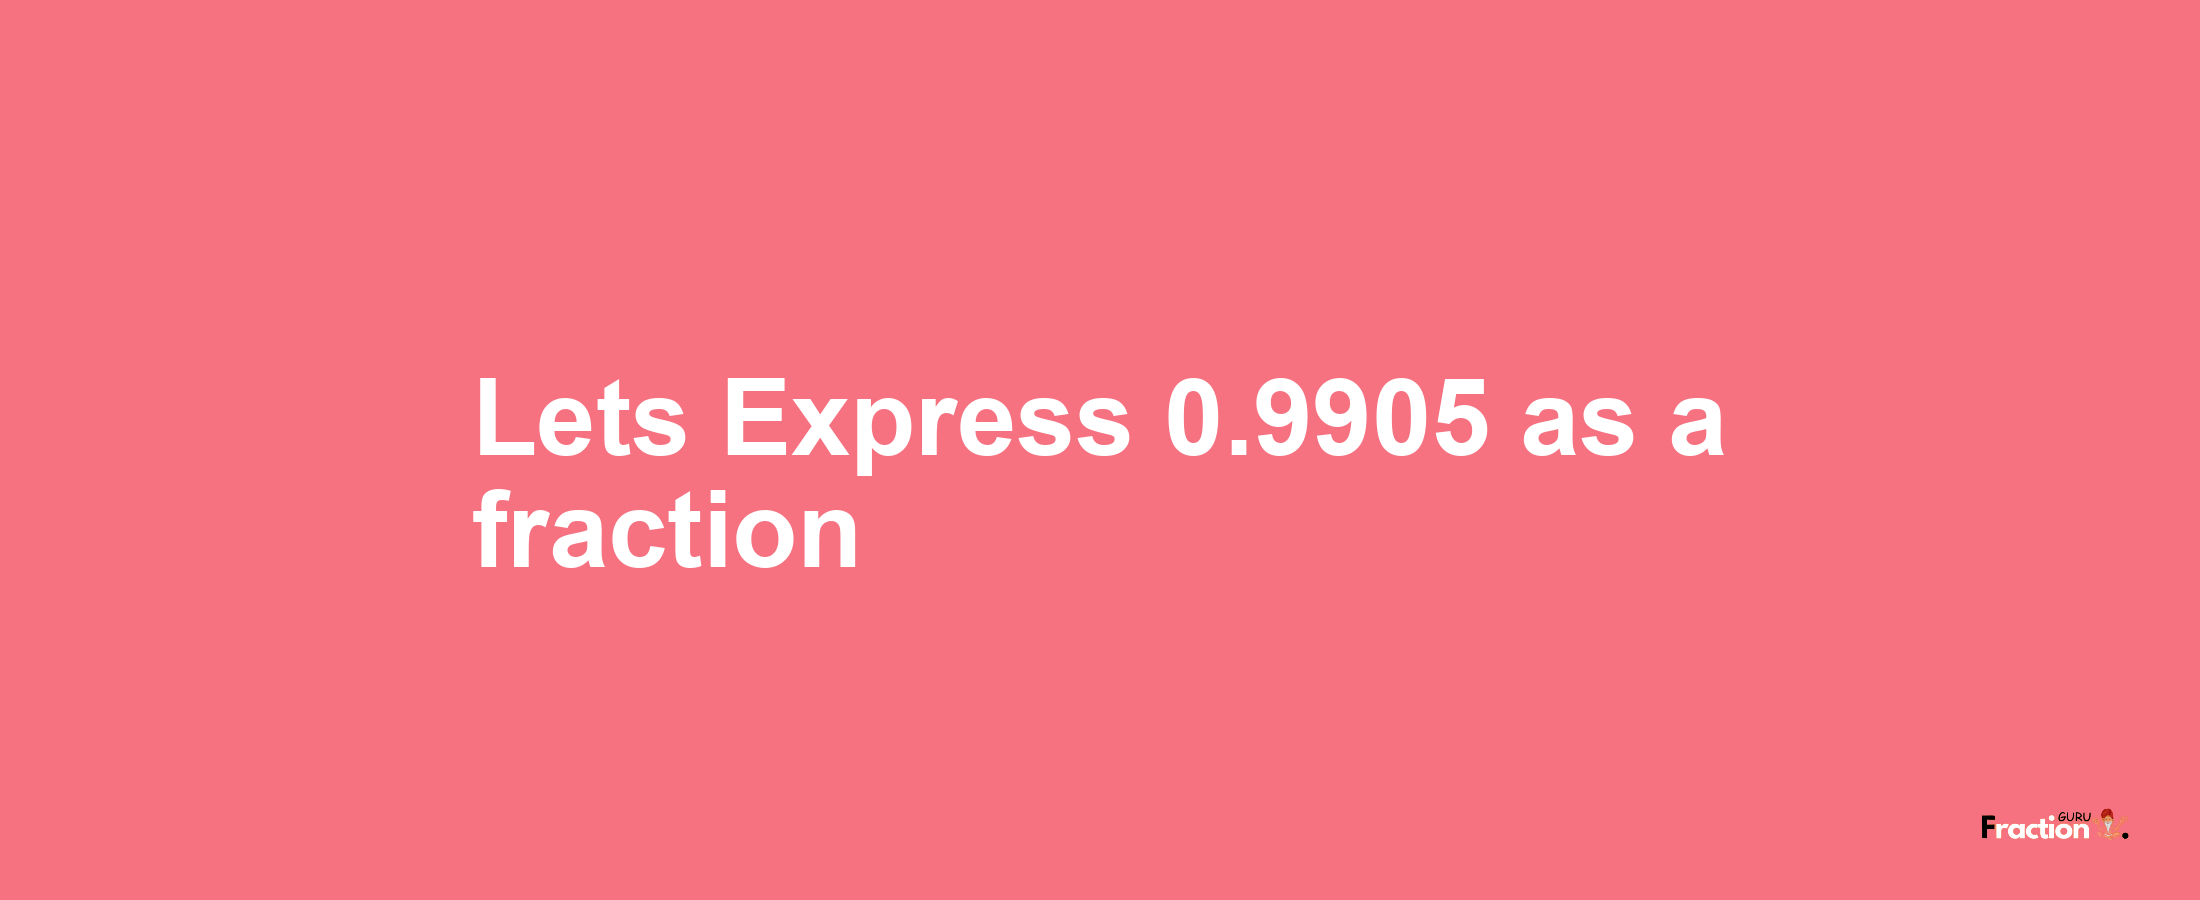 Lets Express 0.9905 as afraction